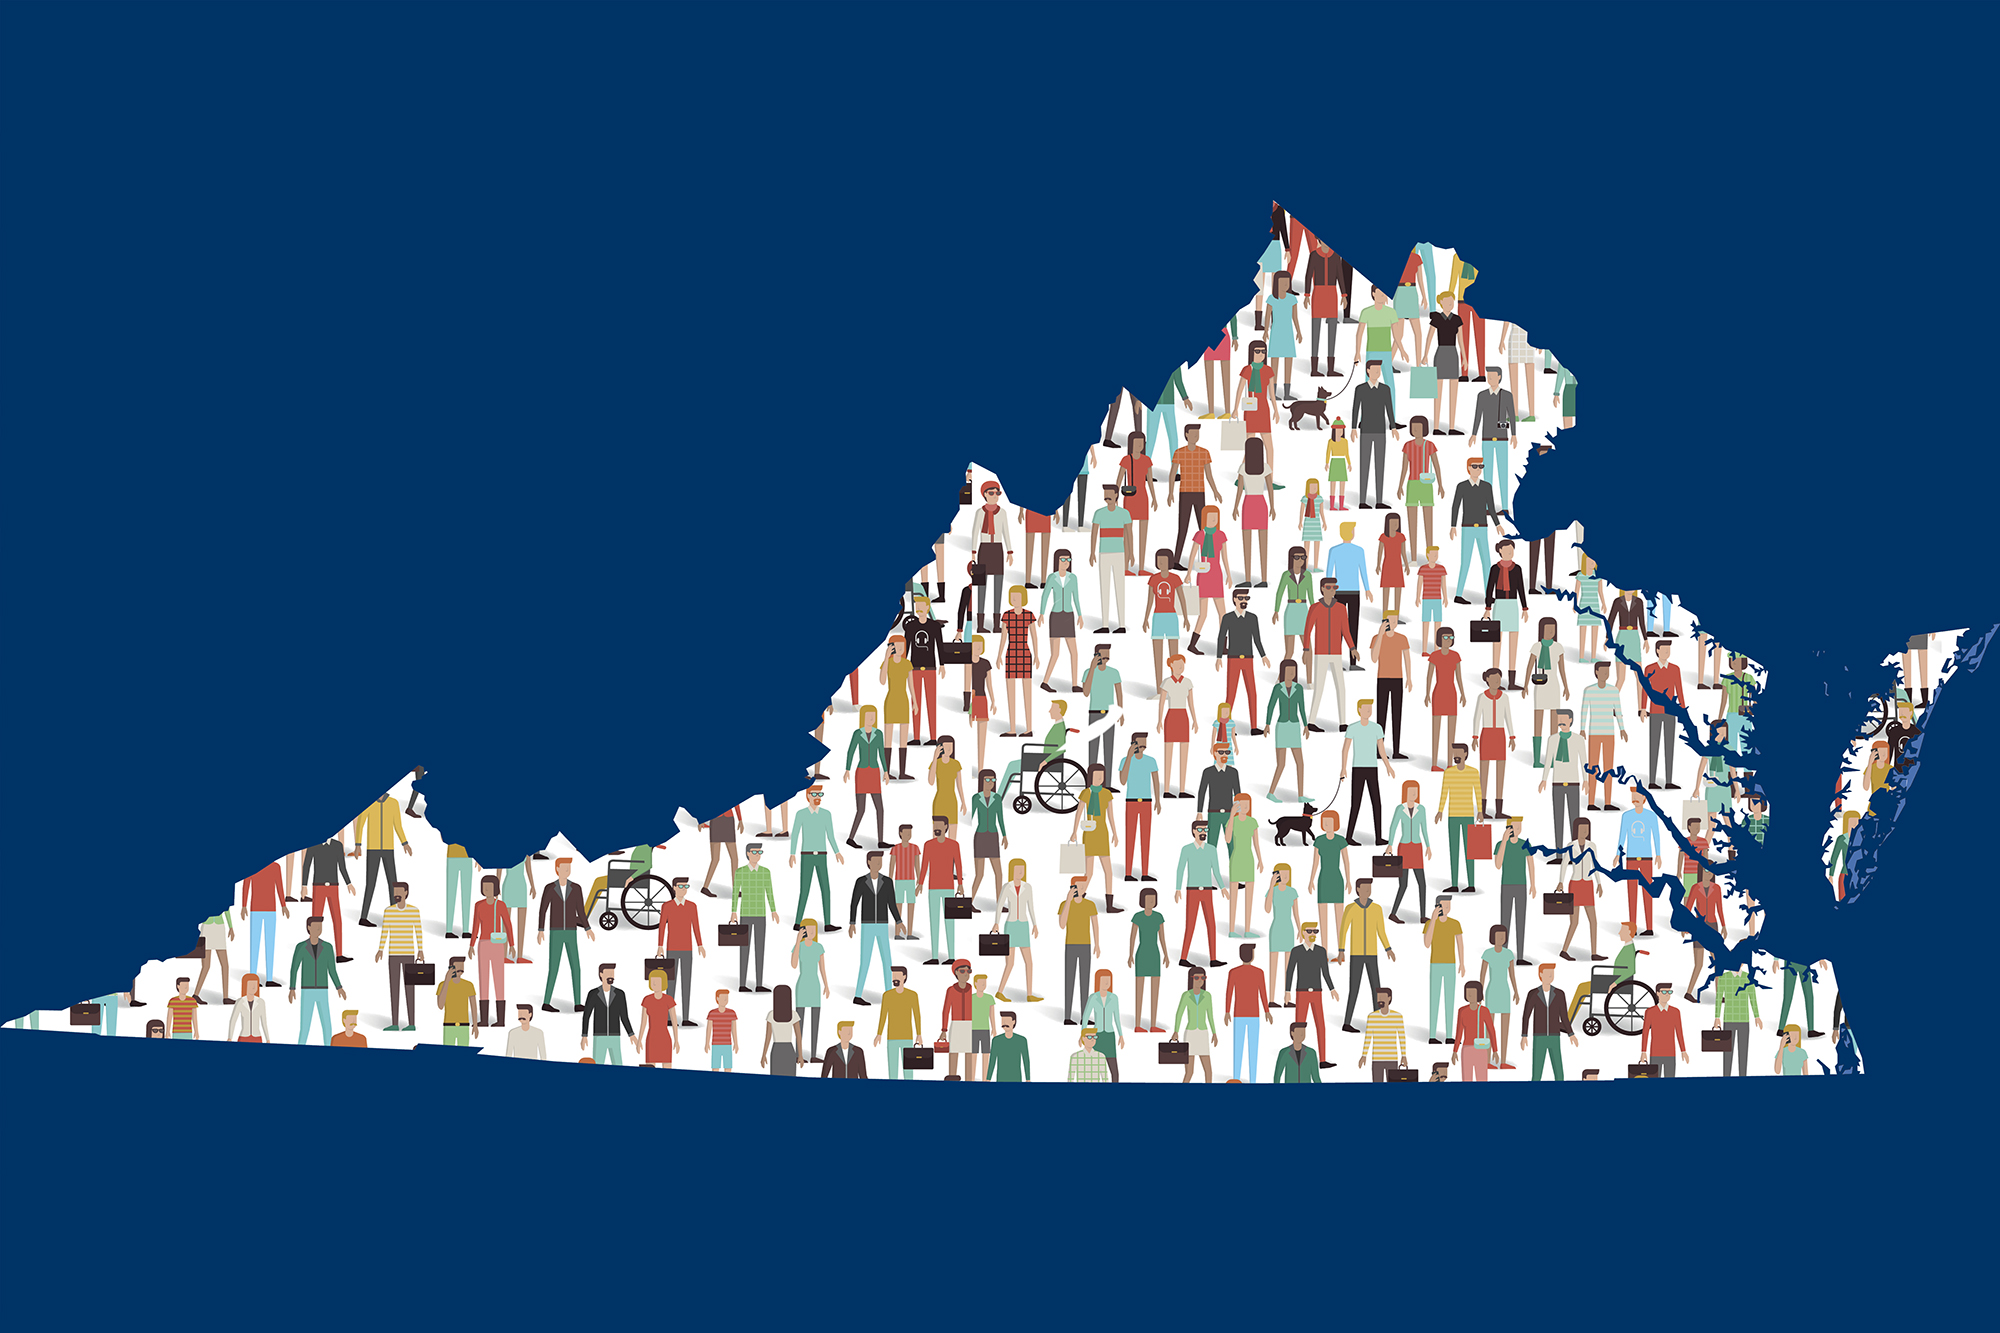 The state of Virginia with illustrations of people inside of it